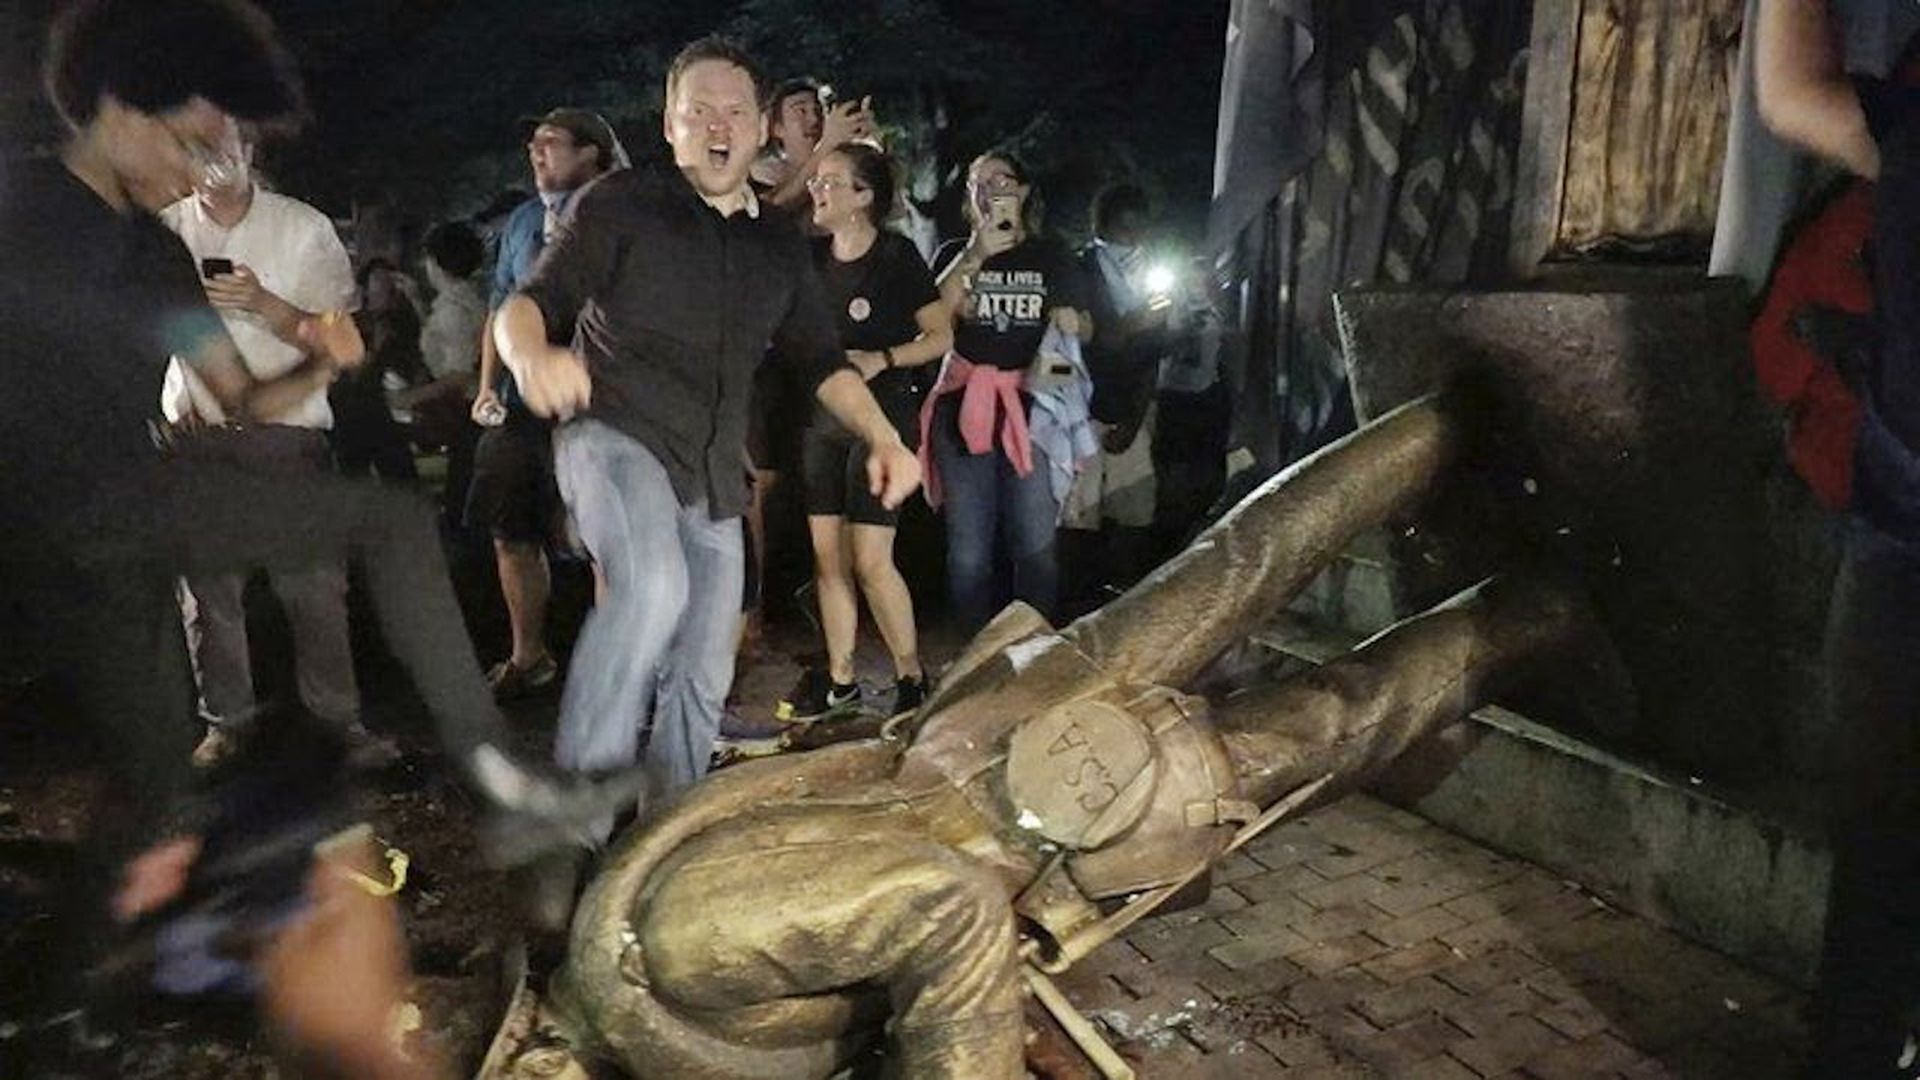 People stand around a fallen statue.